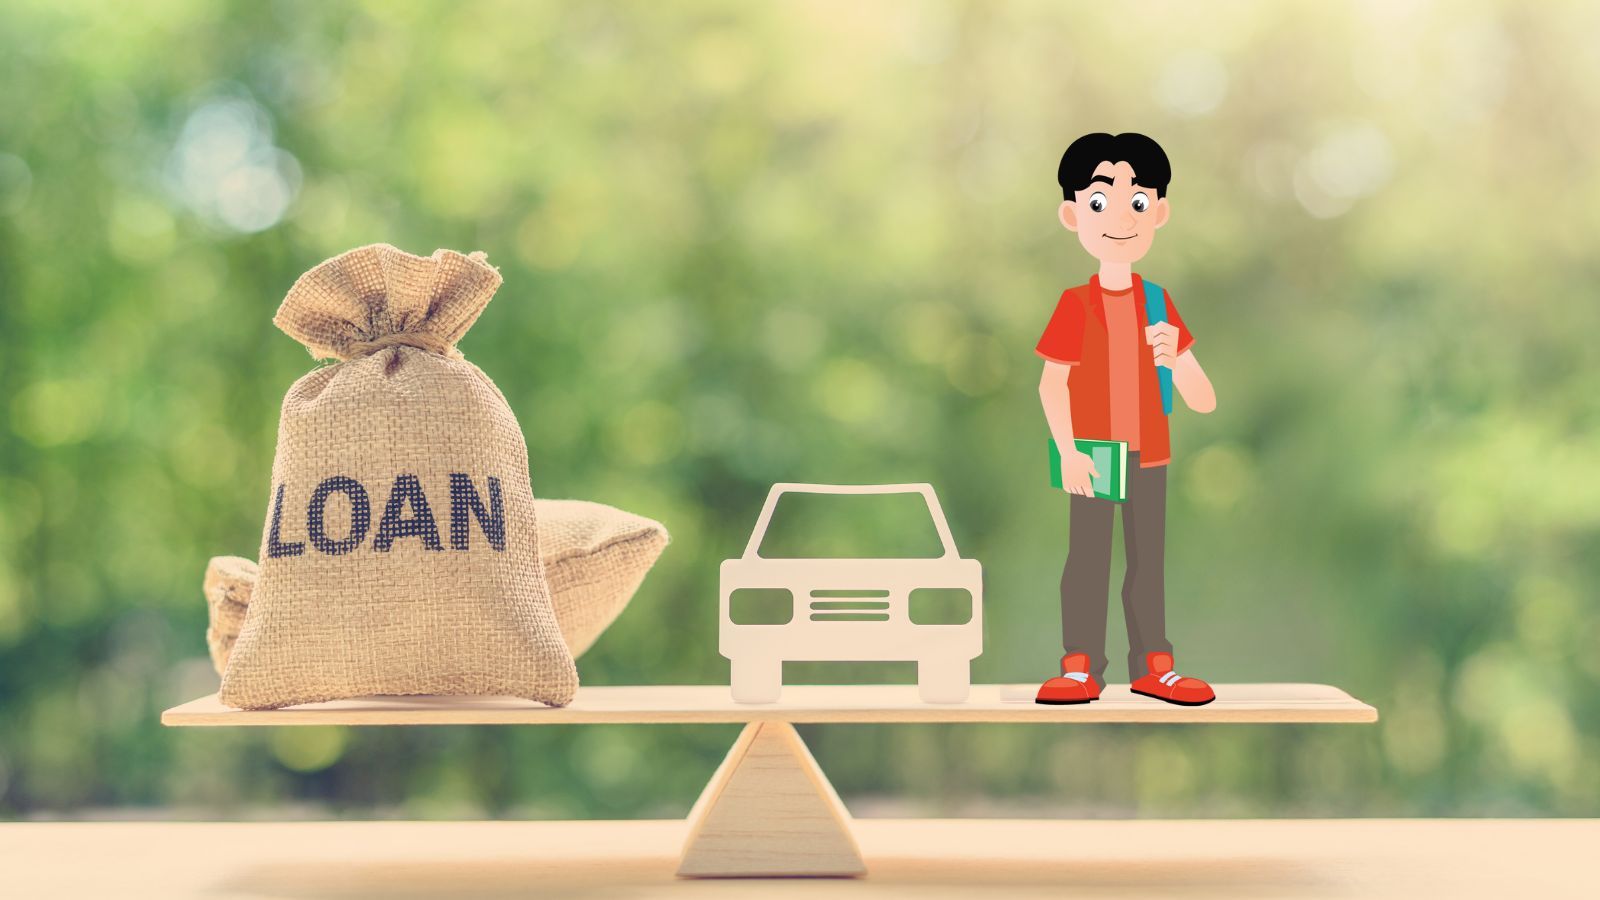 teen standing next to a car and a bag that says 'loan'.